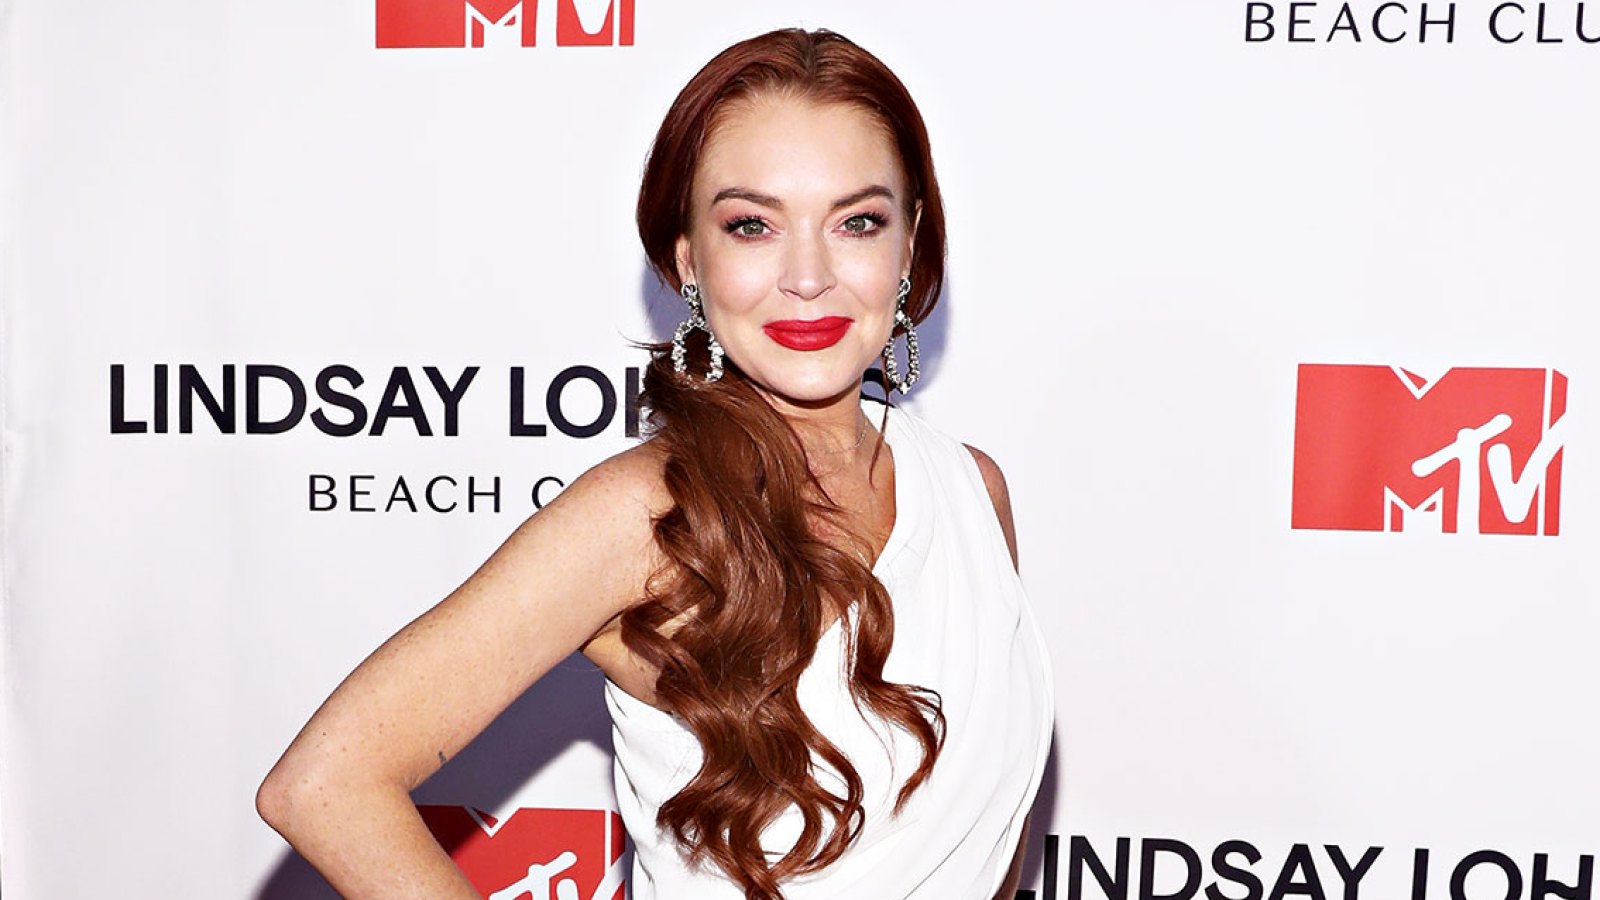 Lindsay Lohan Says She 'Never Really Cared About Who’s Rooting Against' Her Lindsay Lohan's Beach Club